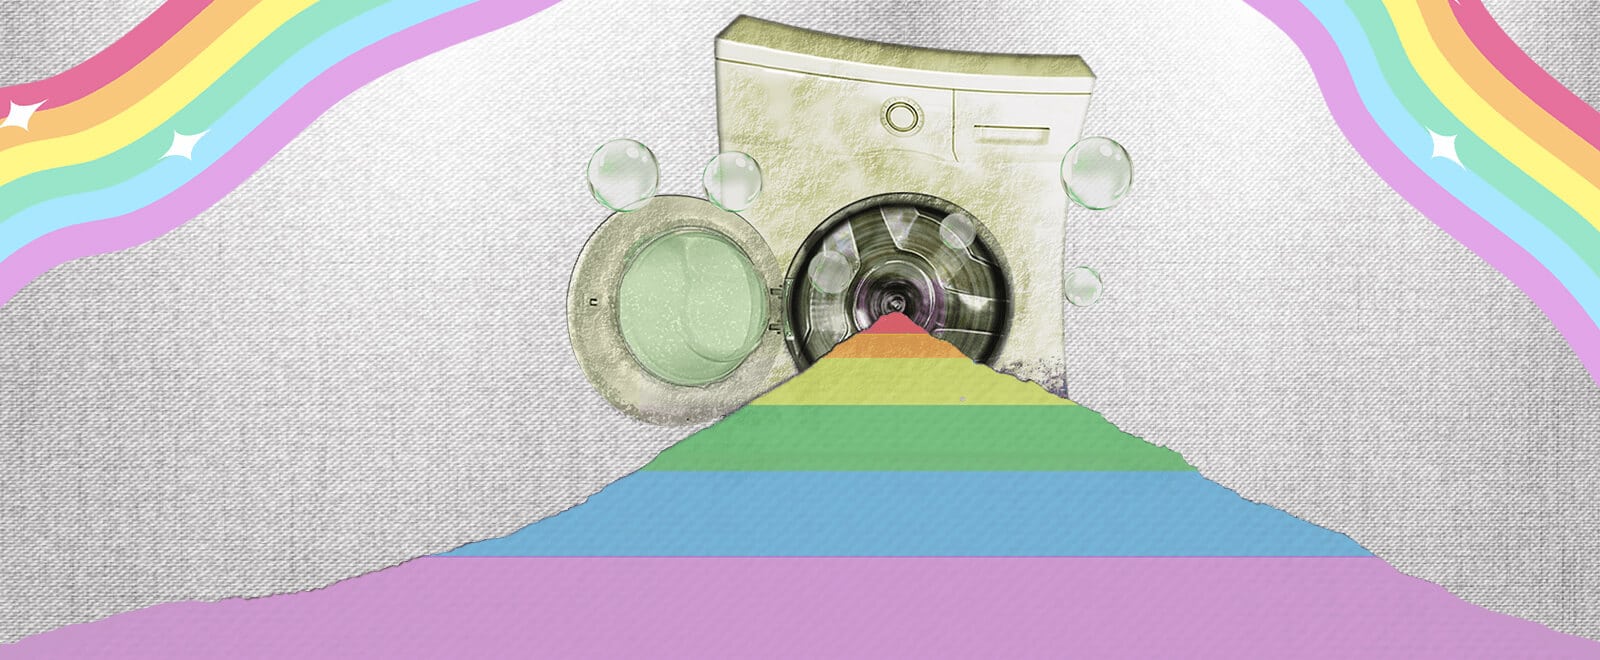 Rainbow washing. Image of a washing machine doing its best to clean filthy rags and turn them into rainbows.